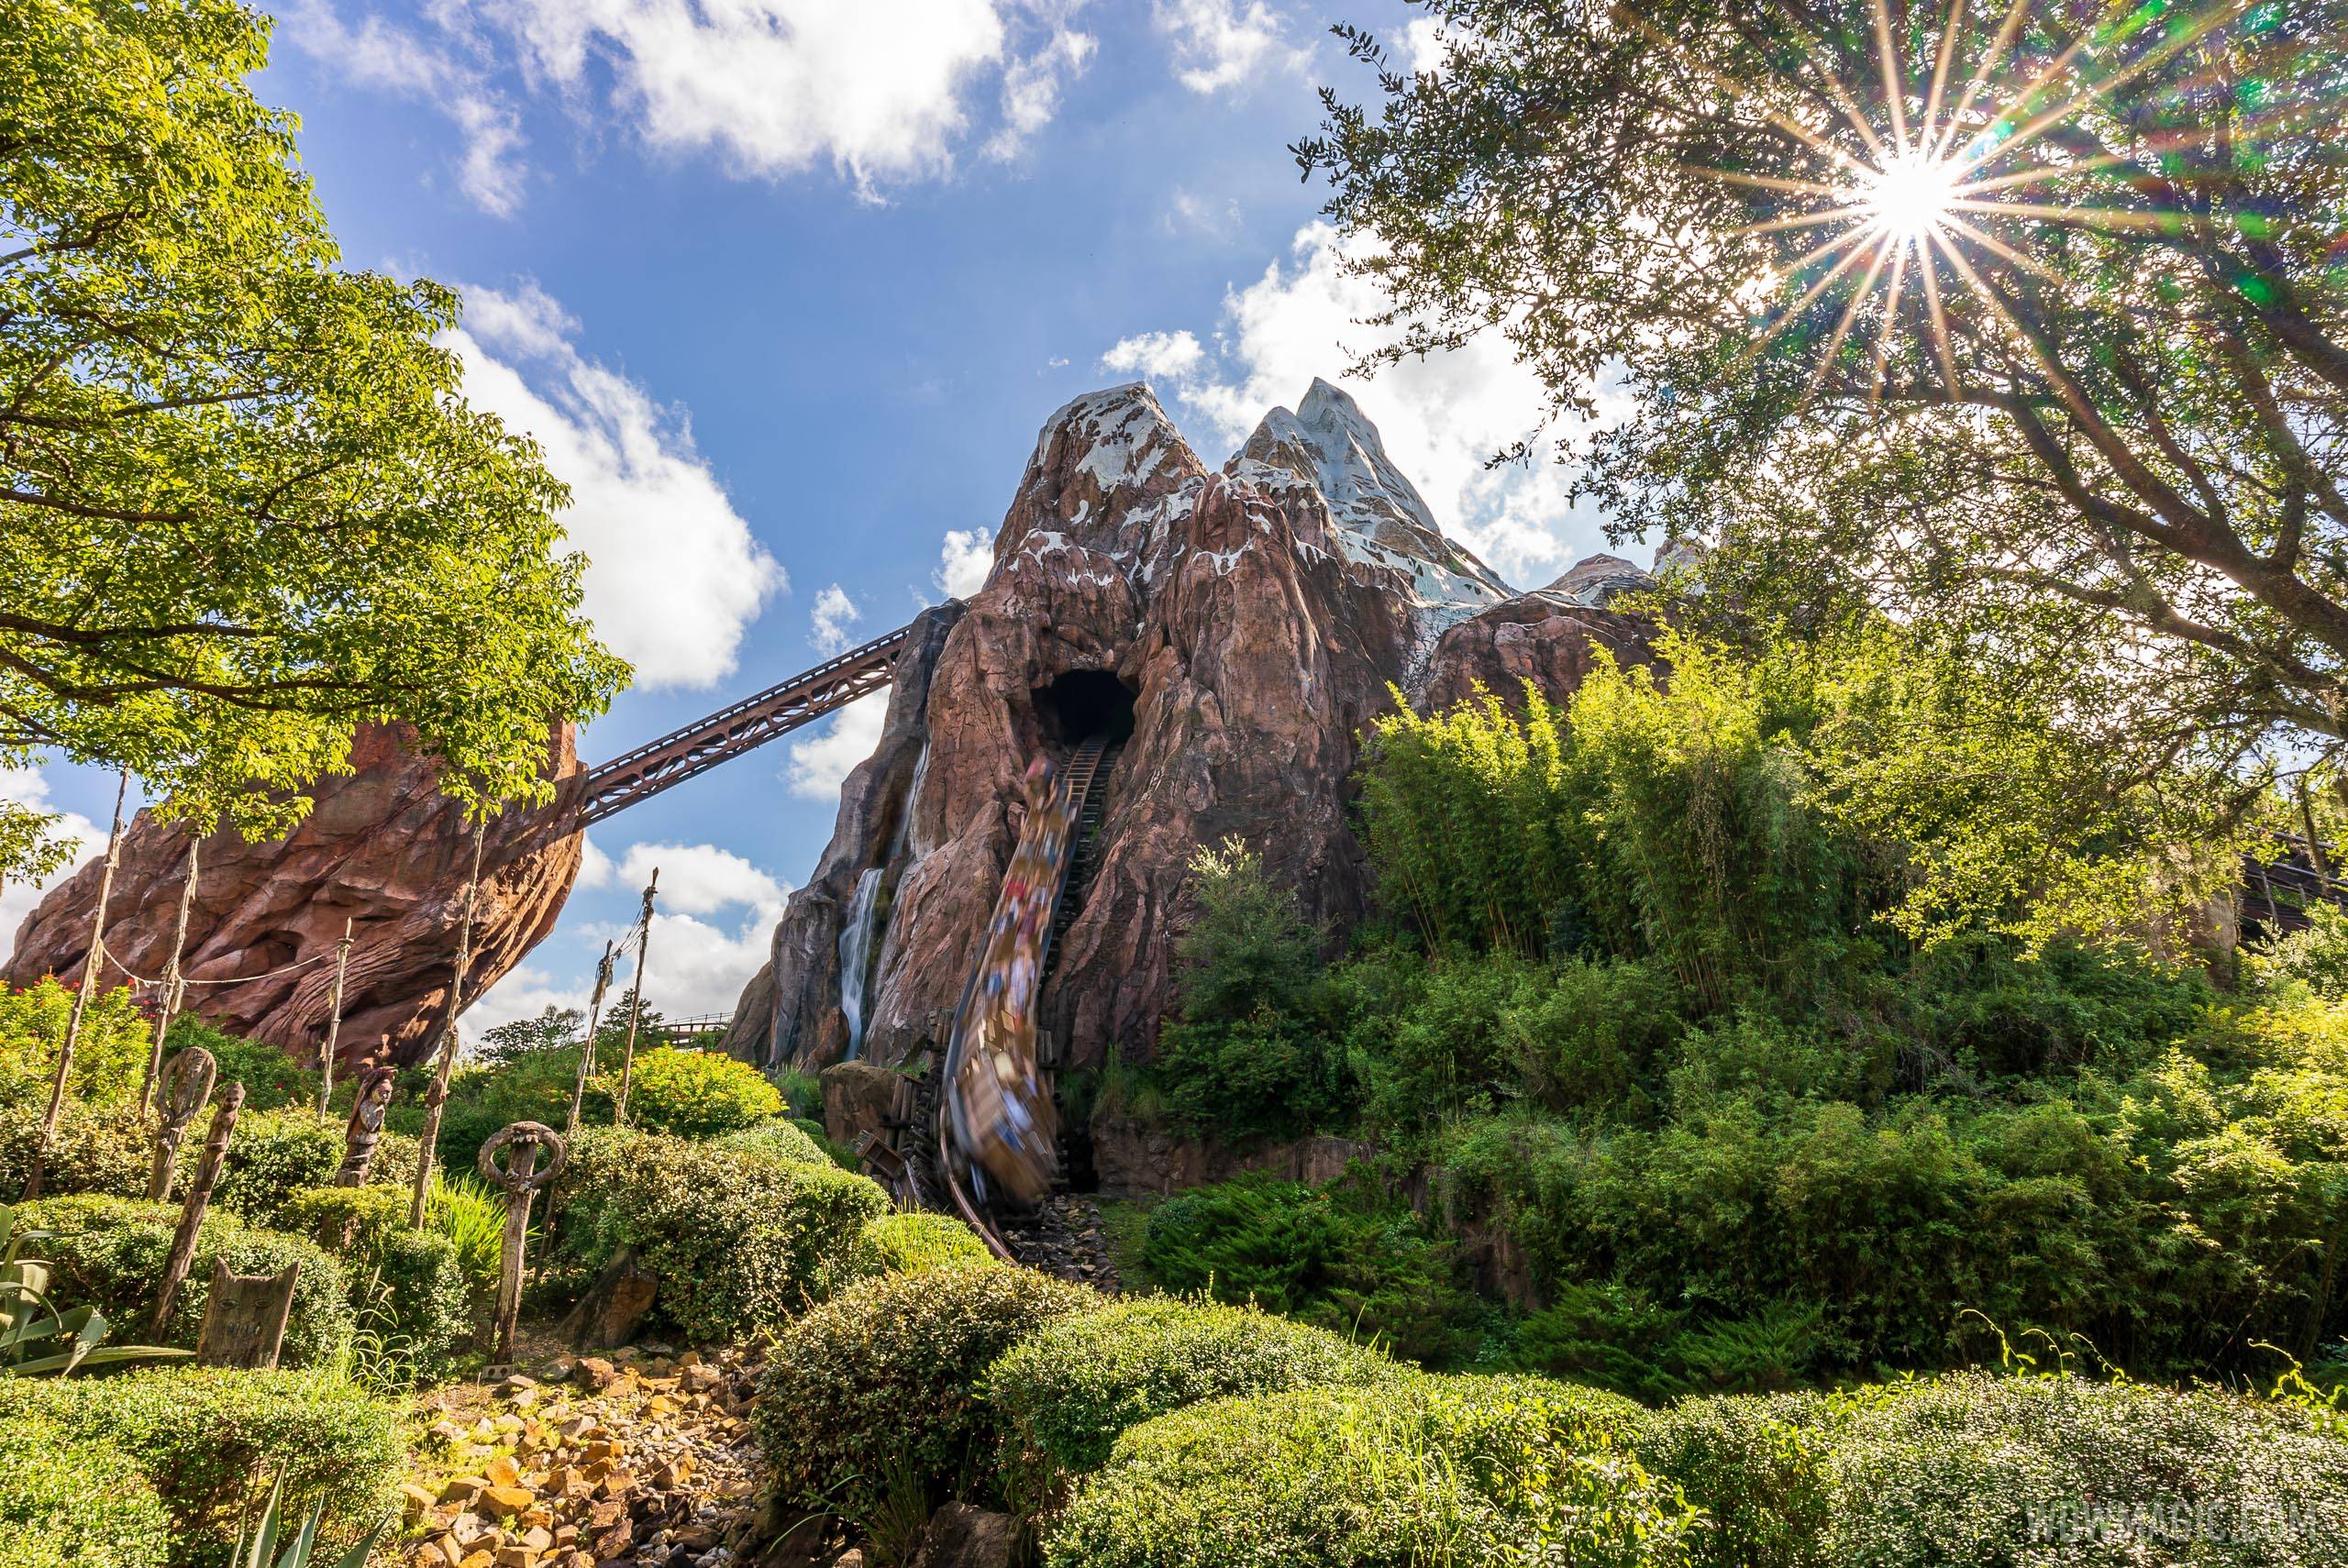 Expedition Everest is moving from an Individual Lighting Lane purchase to Genie+ for the holidays